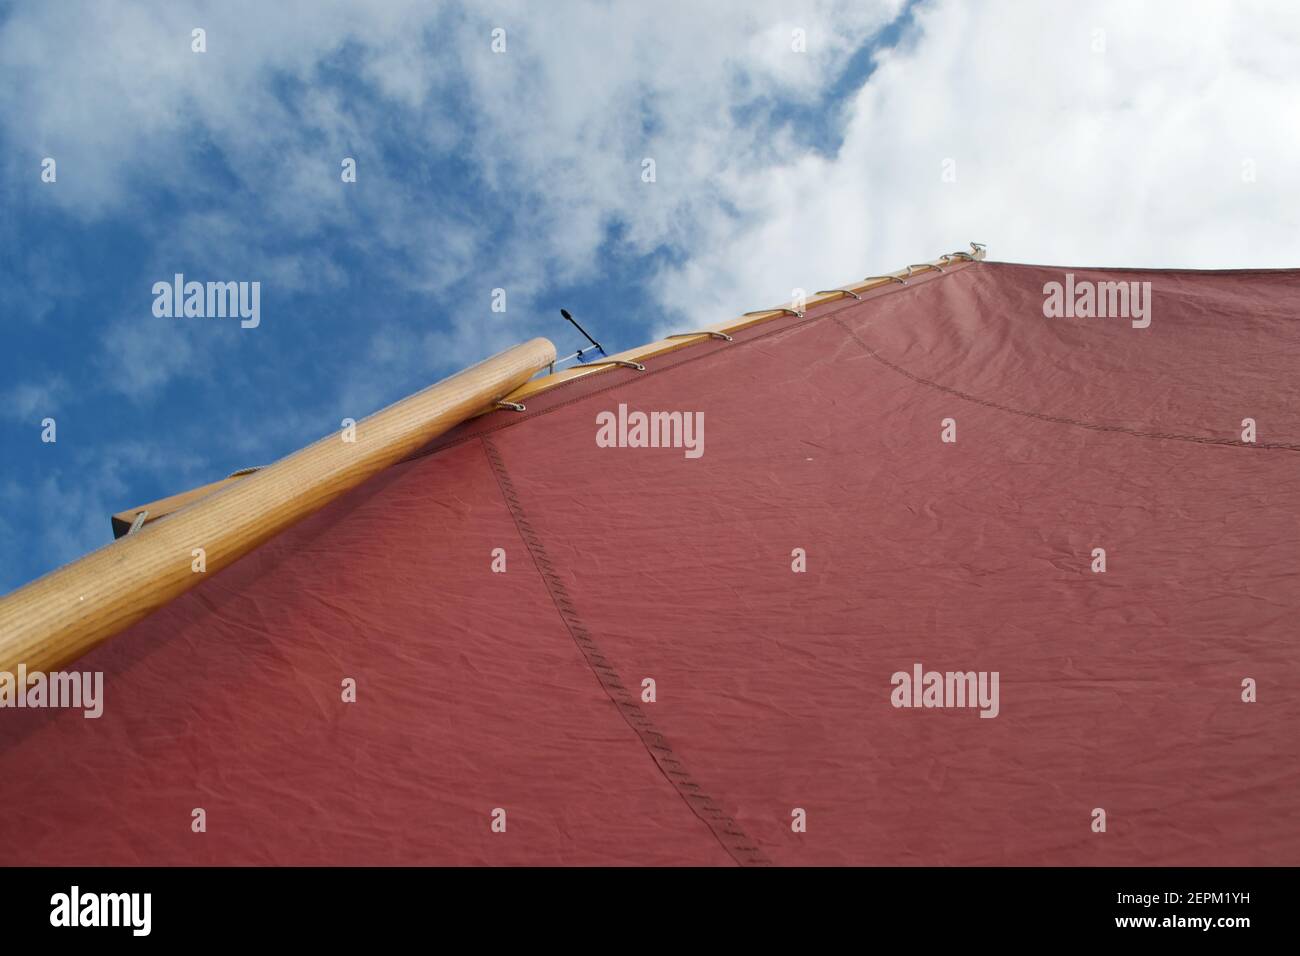 Looking up the rigging of a gaff rigged sailing dinghy: red lugsail sail, wooden mast, burgee and bright blue sky above Stock Photo